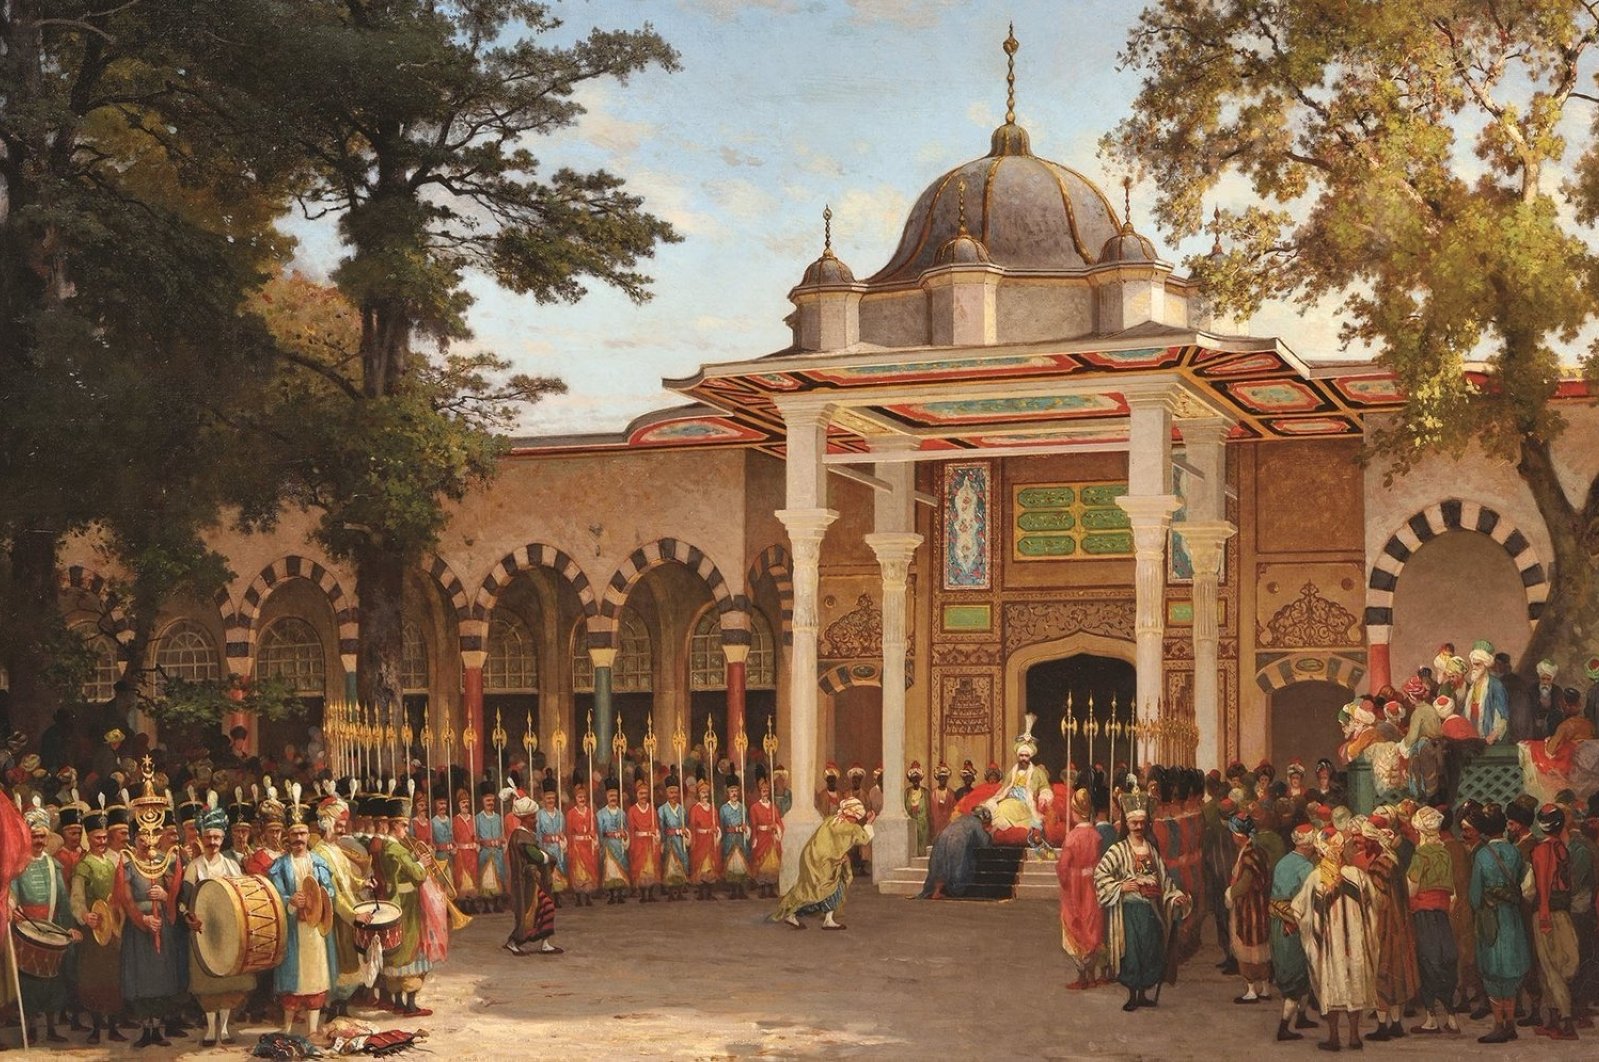 Germain Fabius Brest depicts a reception held in front of the Gate of Felicity in the second courtyard of Topkapı Palace in his 1865 painting “Bayram Greetings Reception."